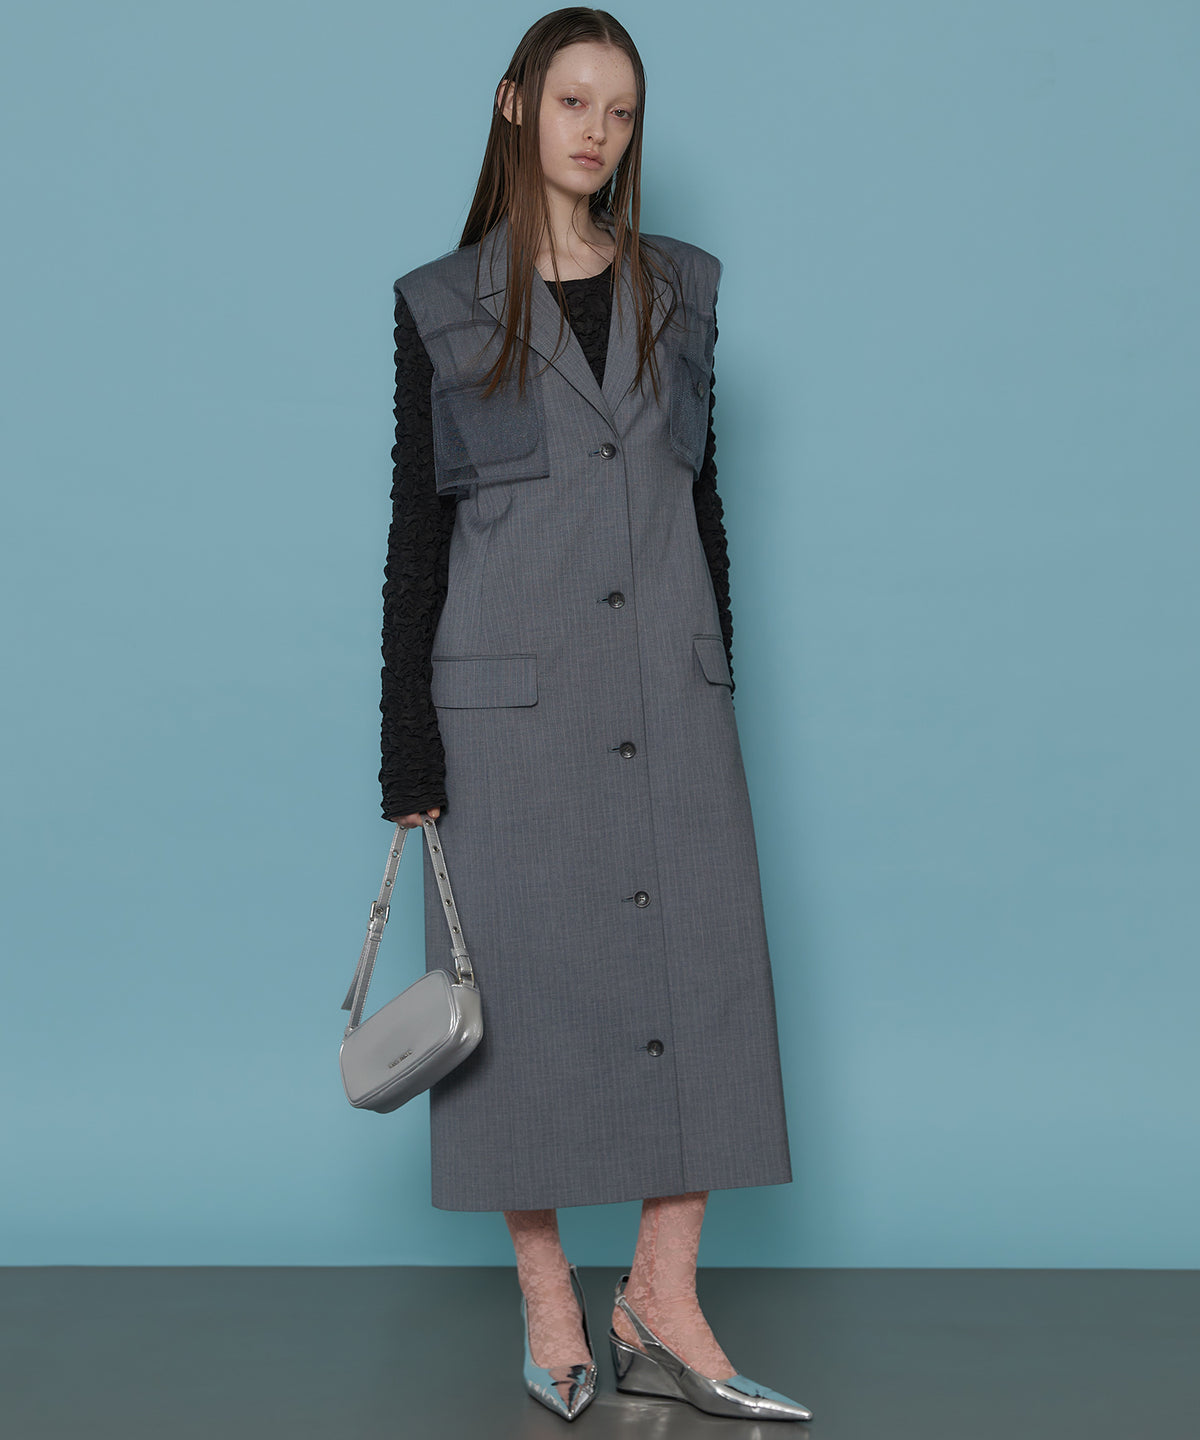 【24SPRING PRE-ORDER】Tailored Gilet One-piece Dress